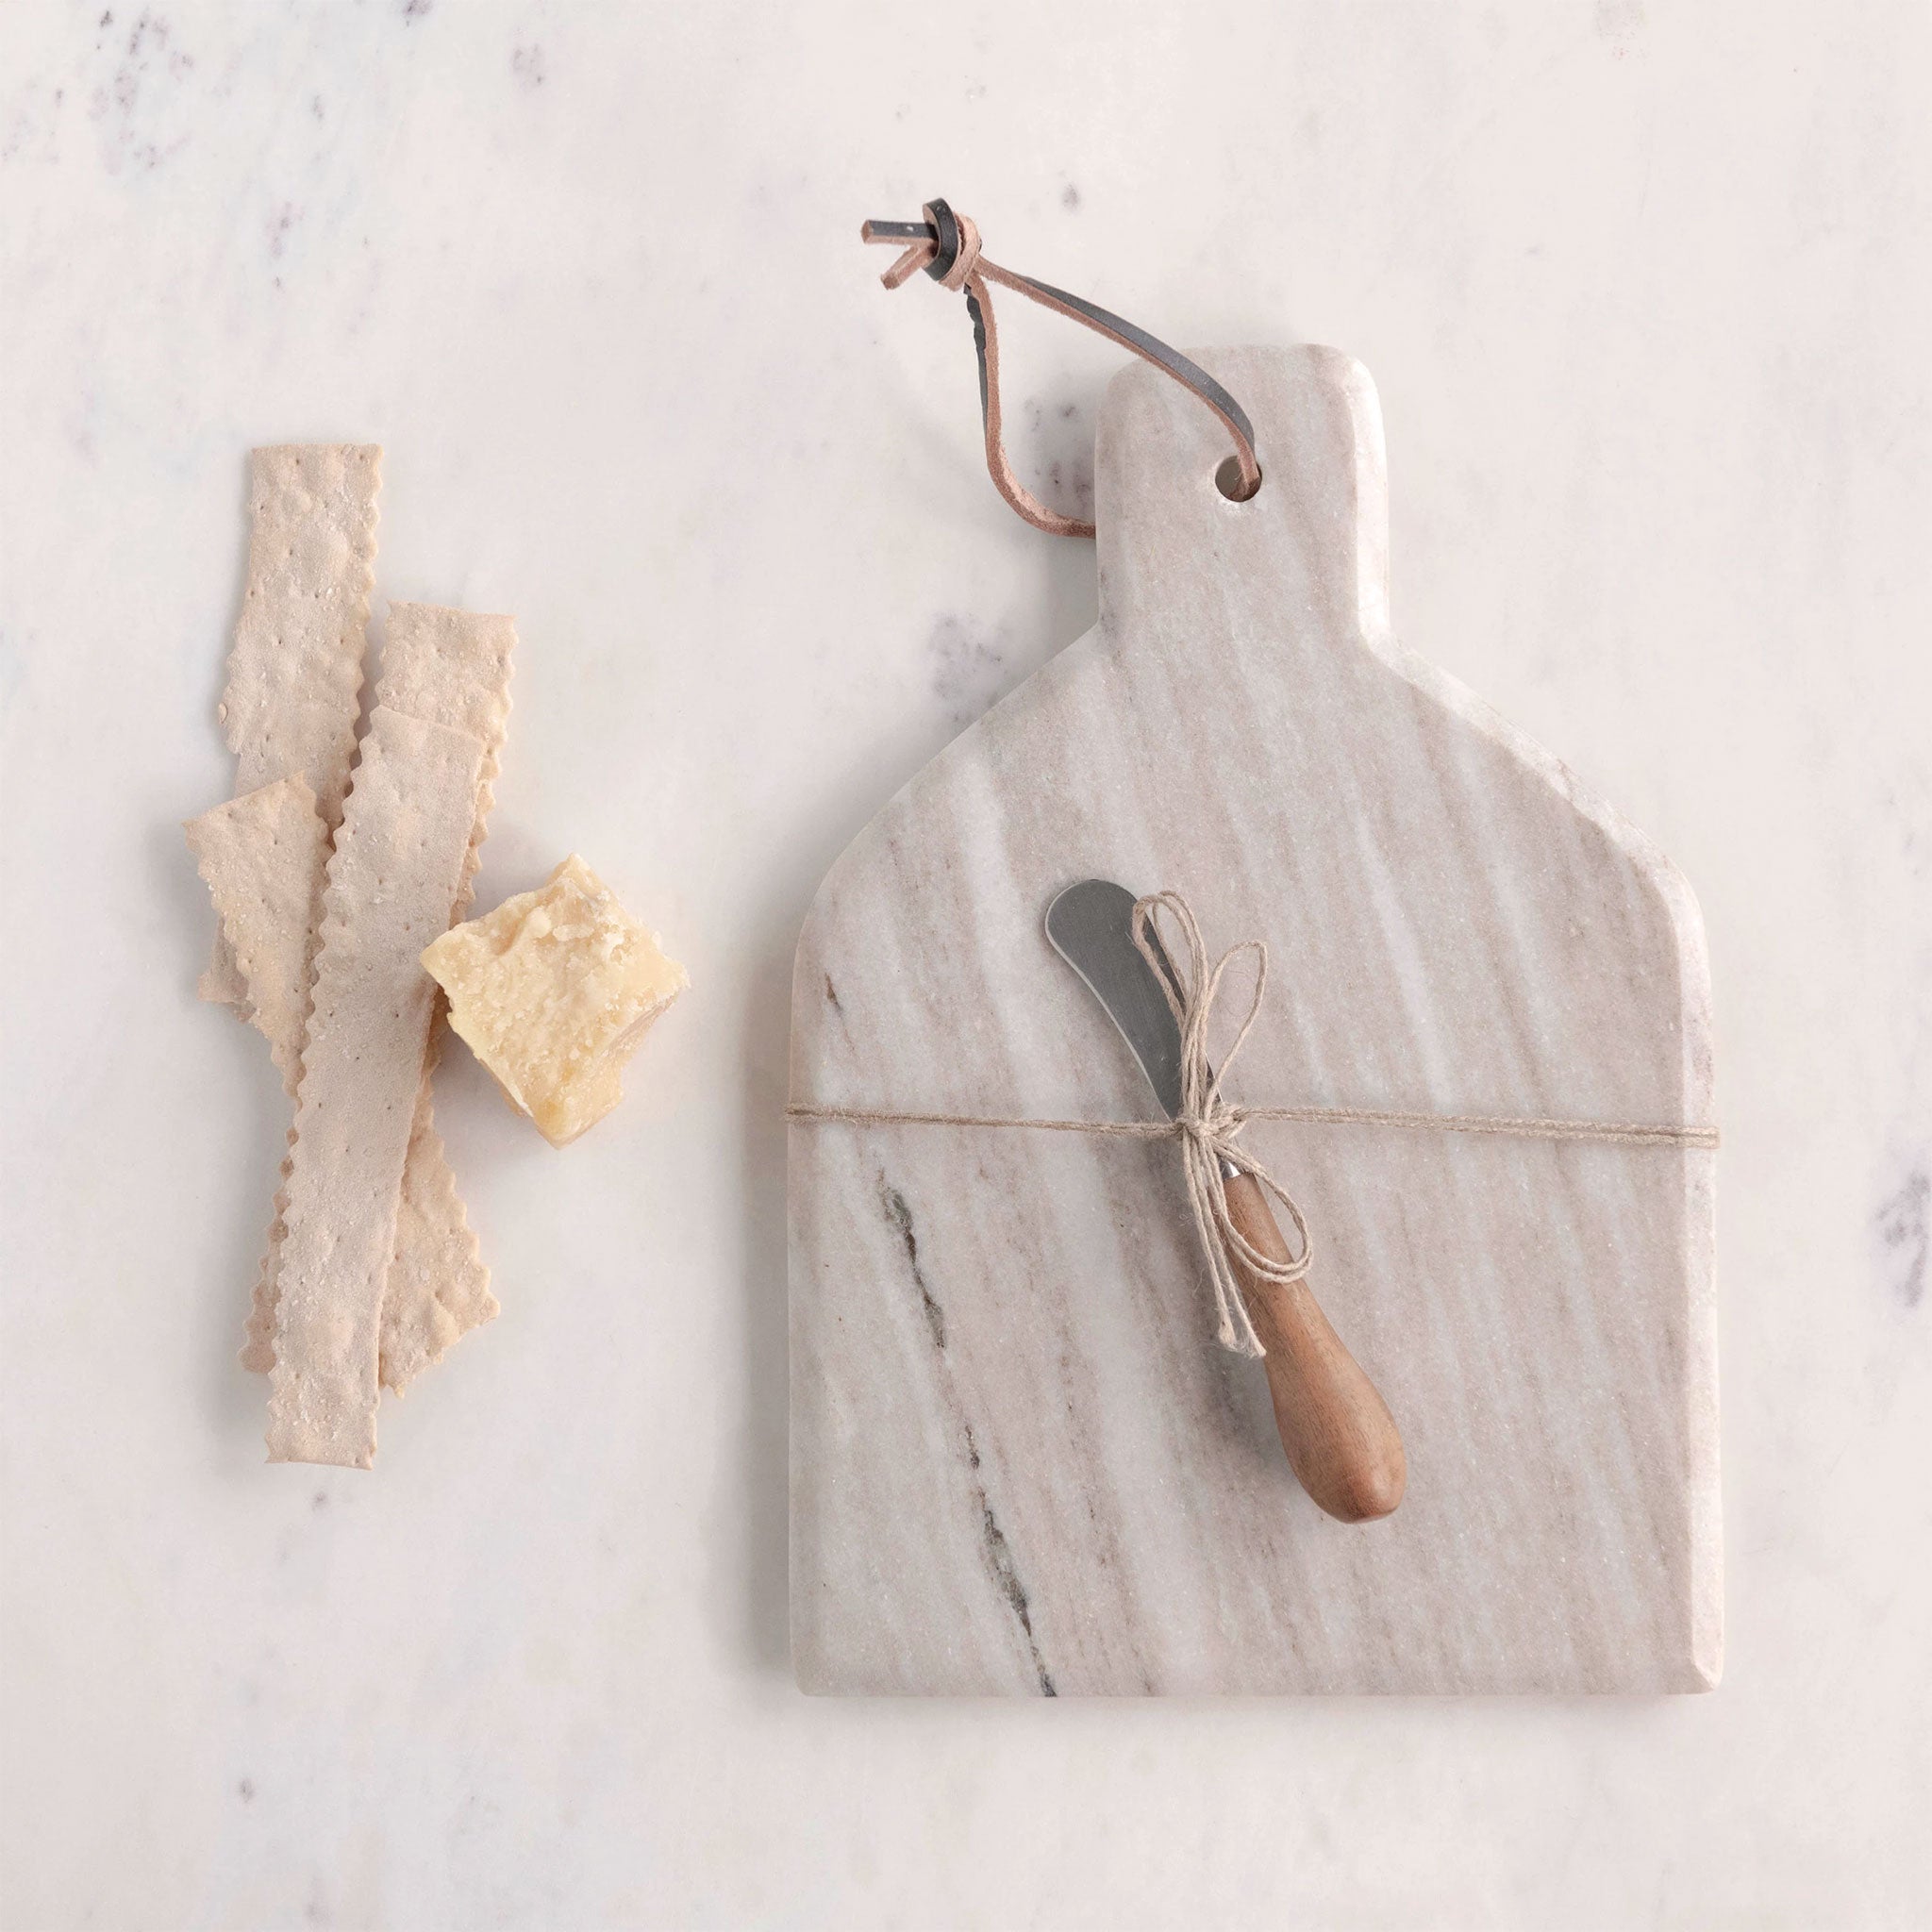 On an ivory background is a tan marble cutting board and knife tied to the center.